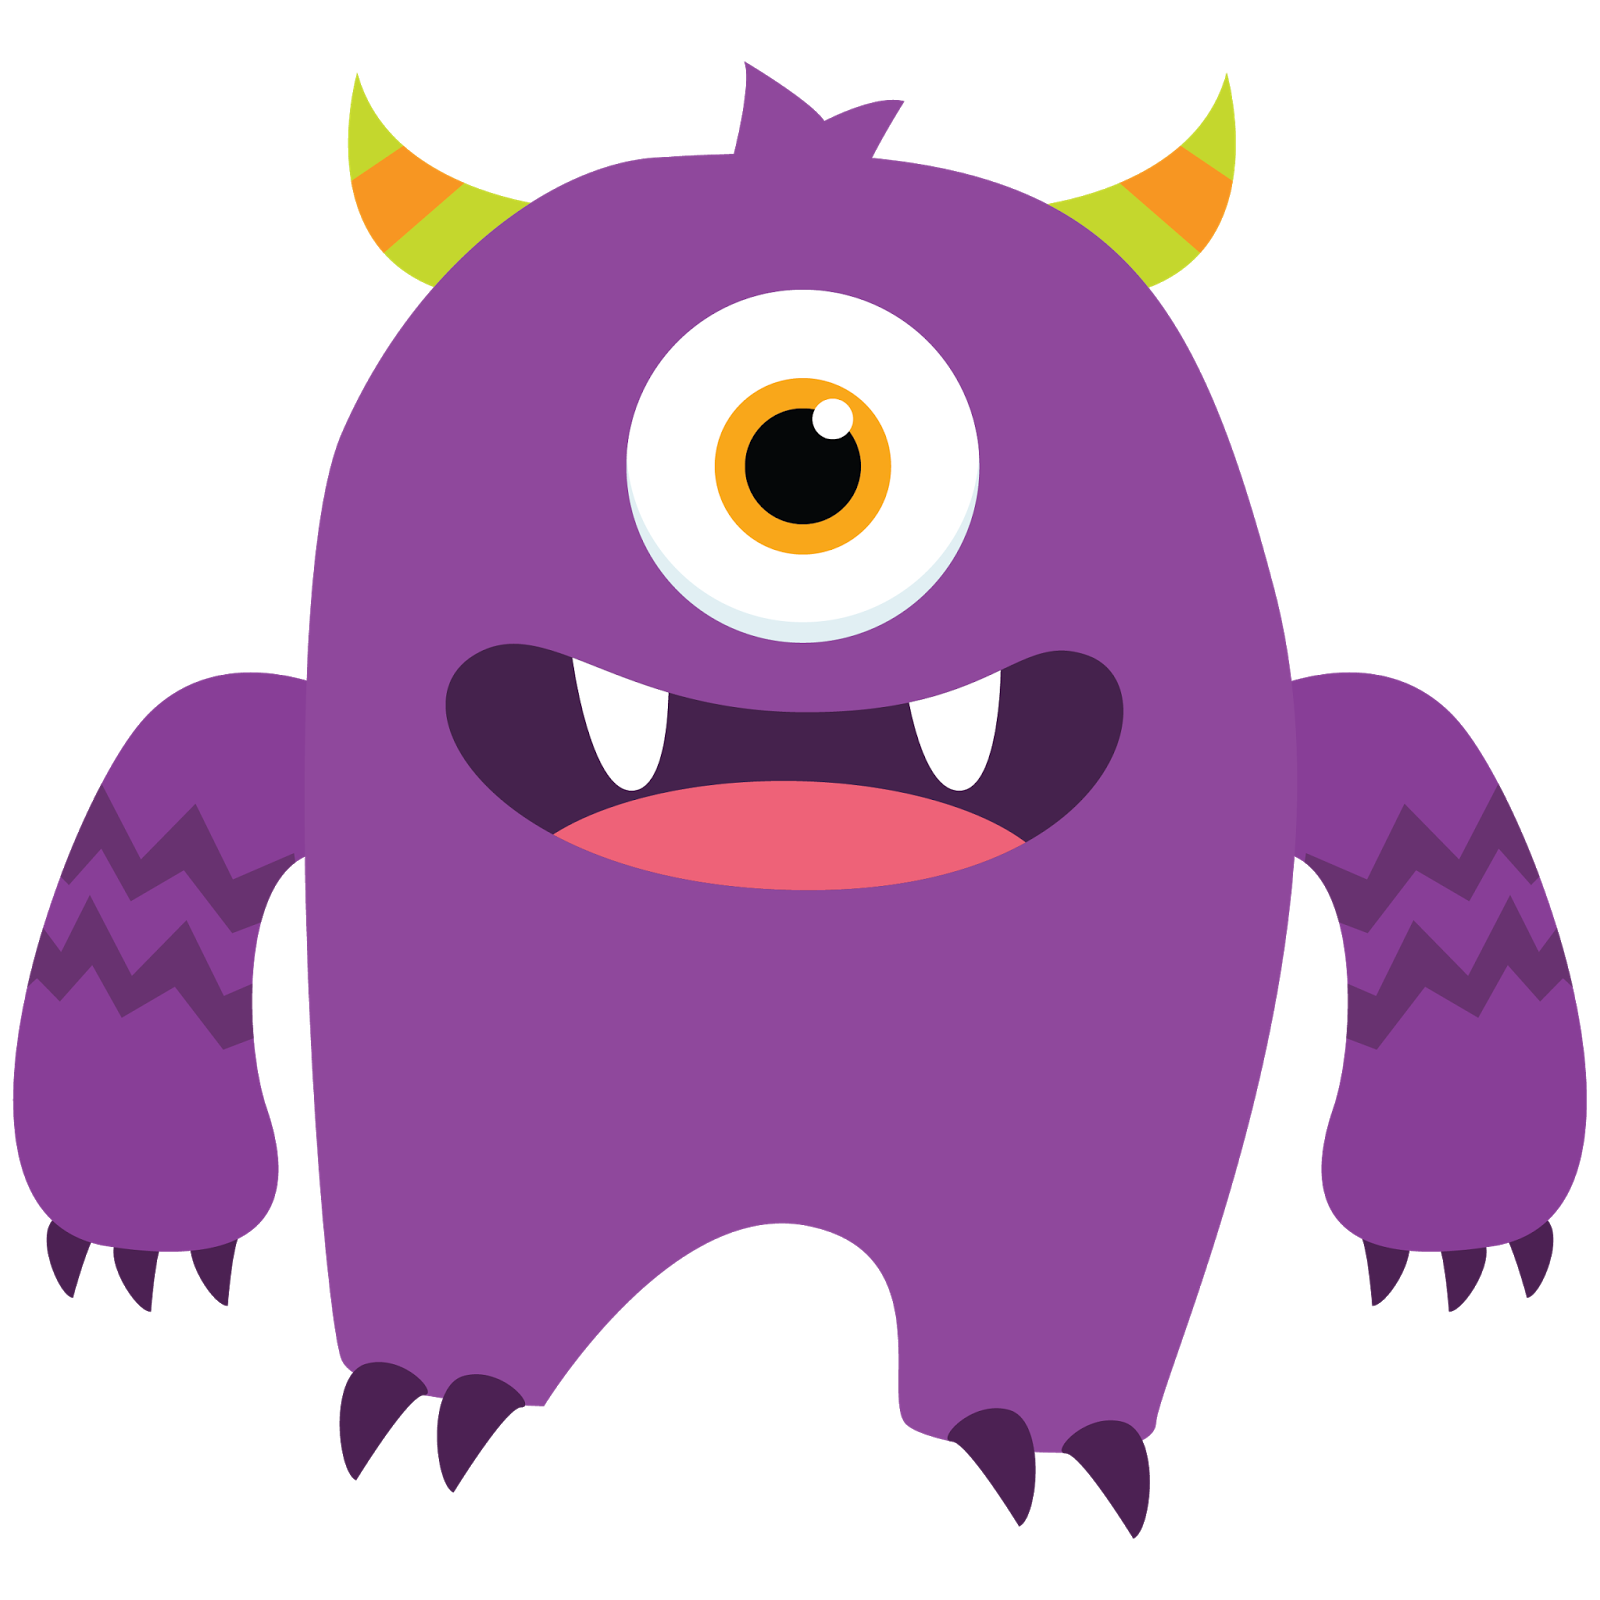 Foot clipart monster. Free images cute pinterest